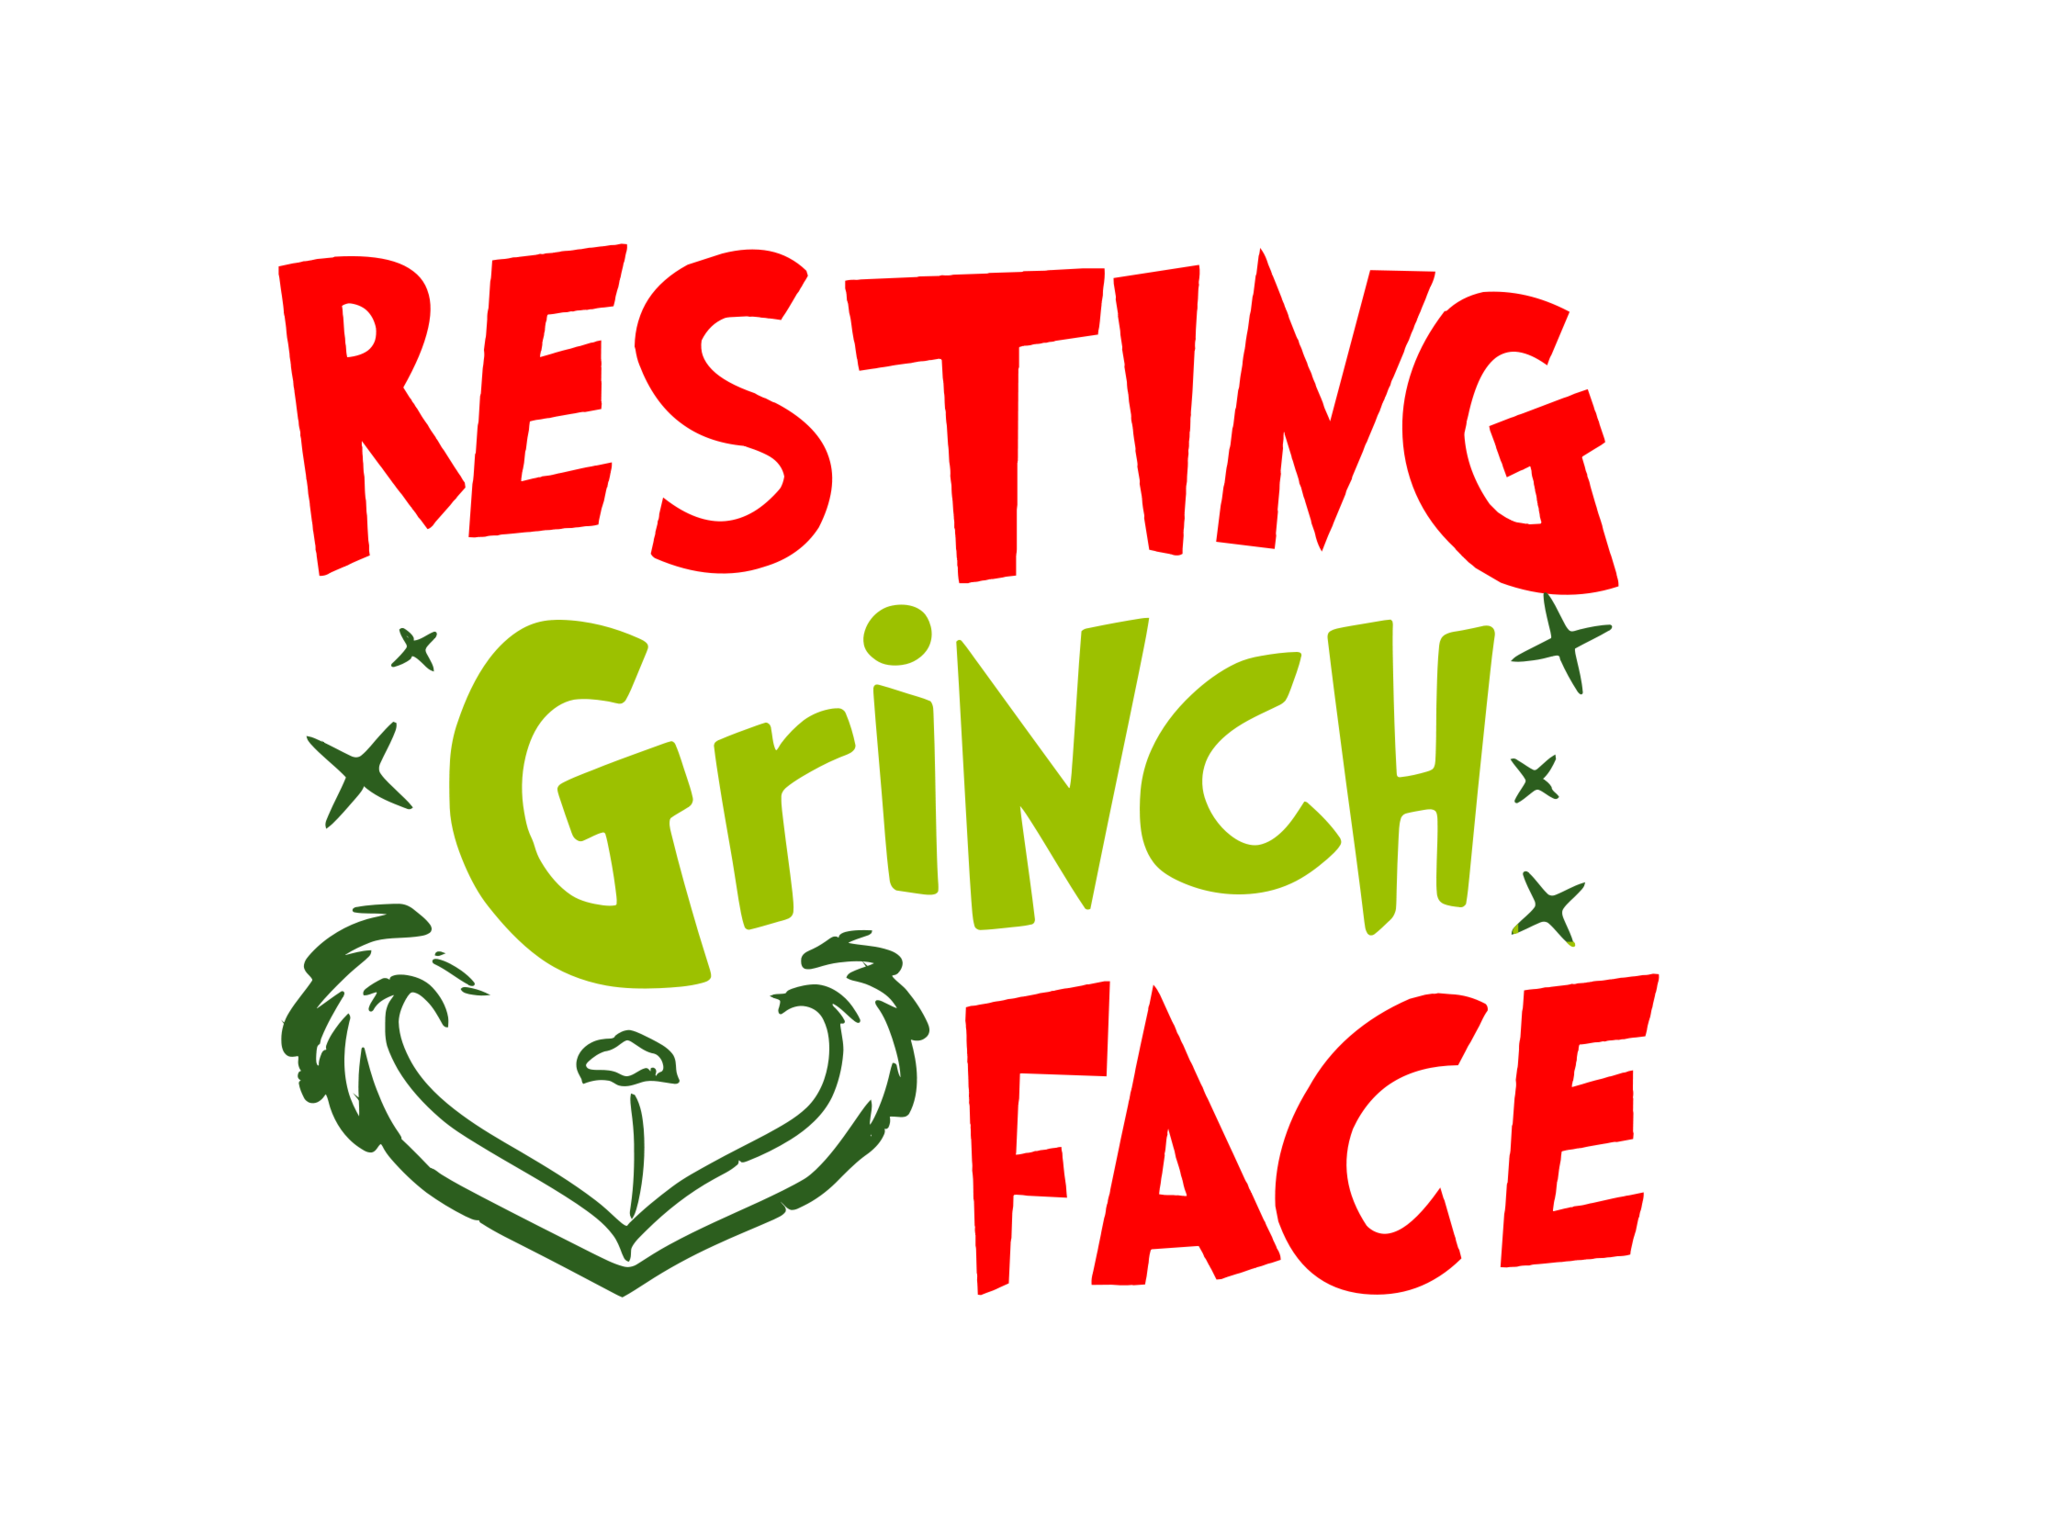 Free Grinch Face Png, Download Free Grinch Face Png png images, Free ...